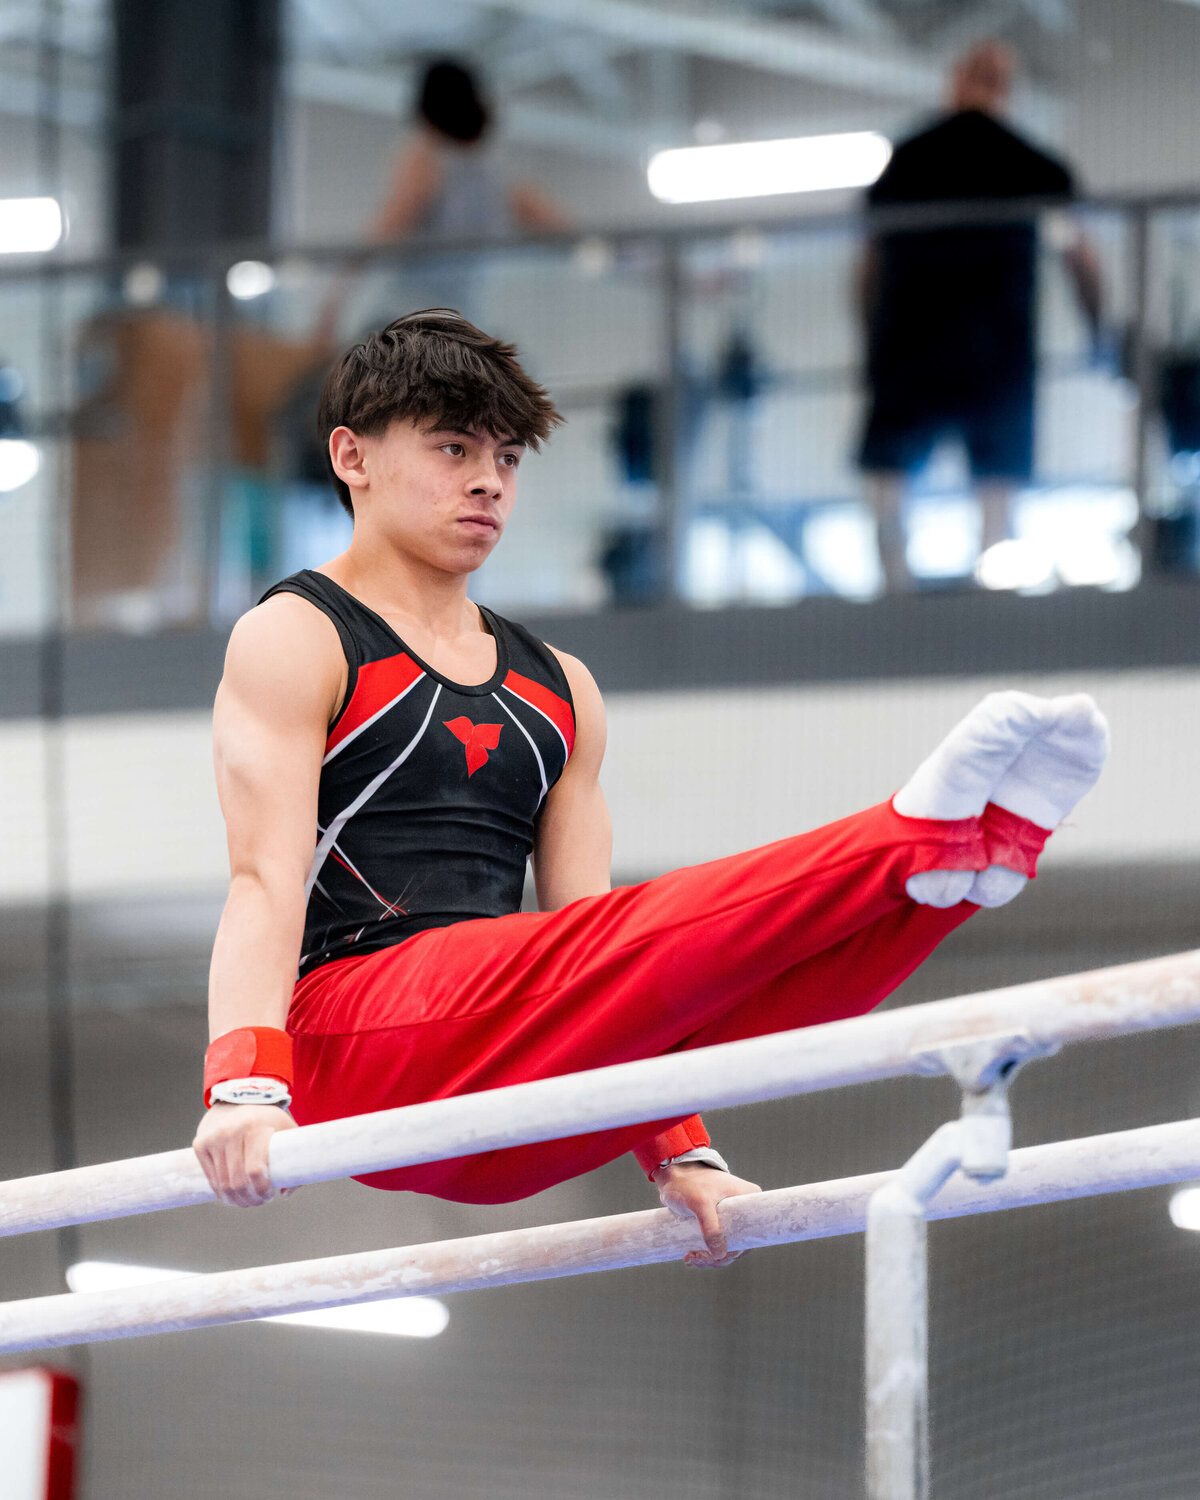 Photo by Luke O'Geil taken at the 2023 inaugural Grizzly Classic men's artistic gymnastics competitionA1_03255